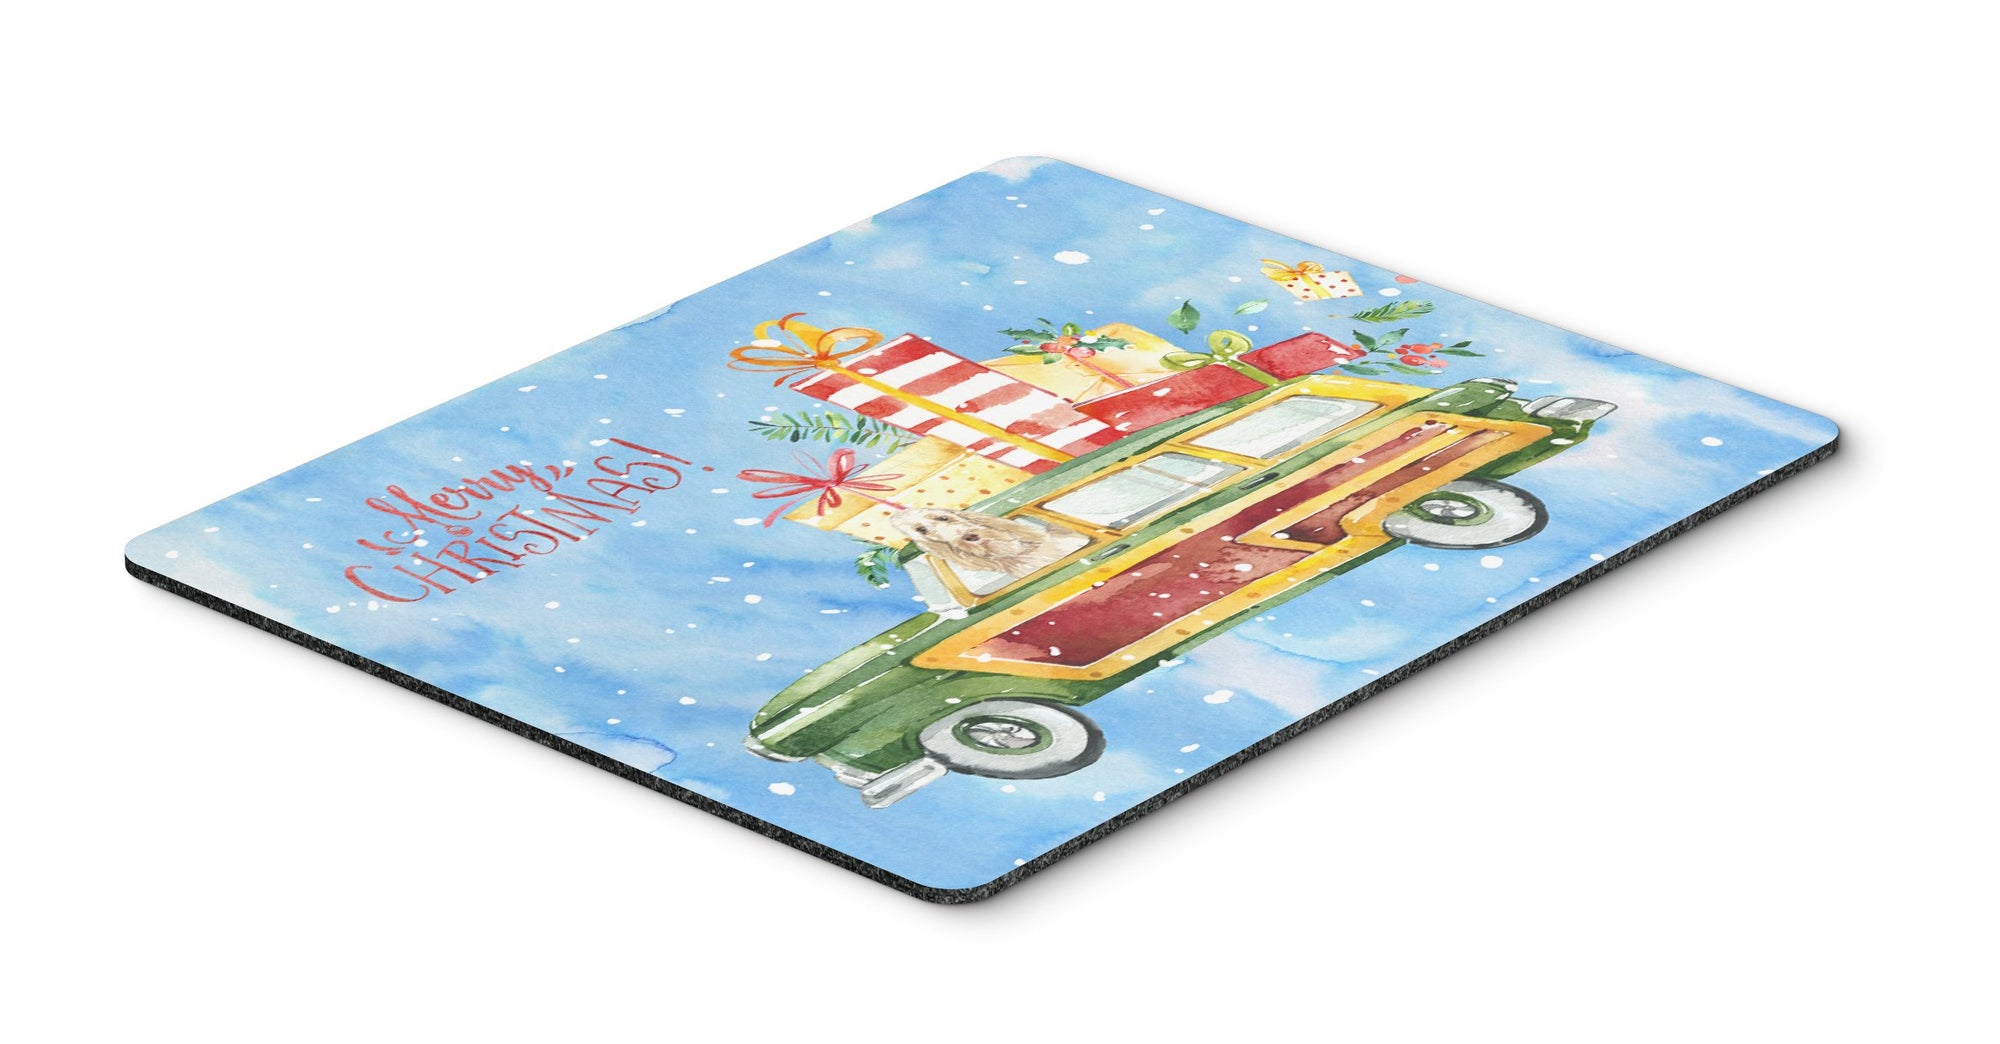 Merry Christmas Spinone Italiano Mouse Pad, Hot Pad or Trivet CK2425MP by Caroline's Treasures